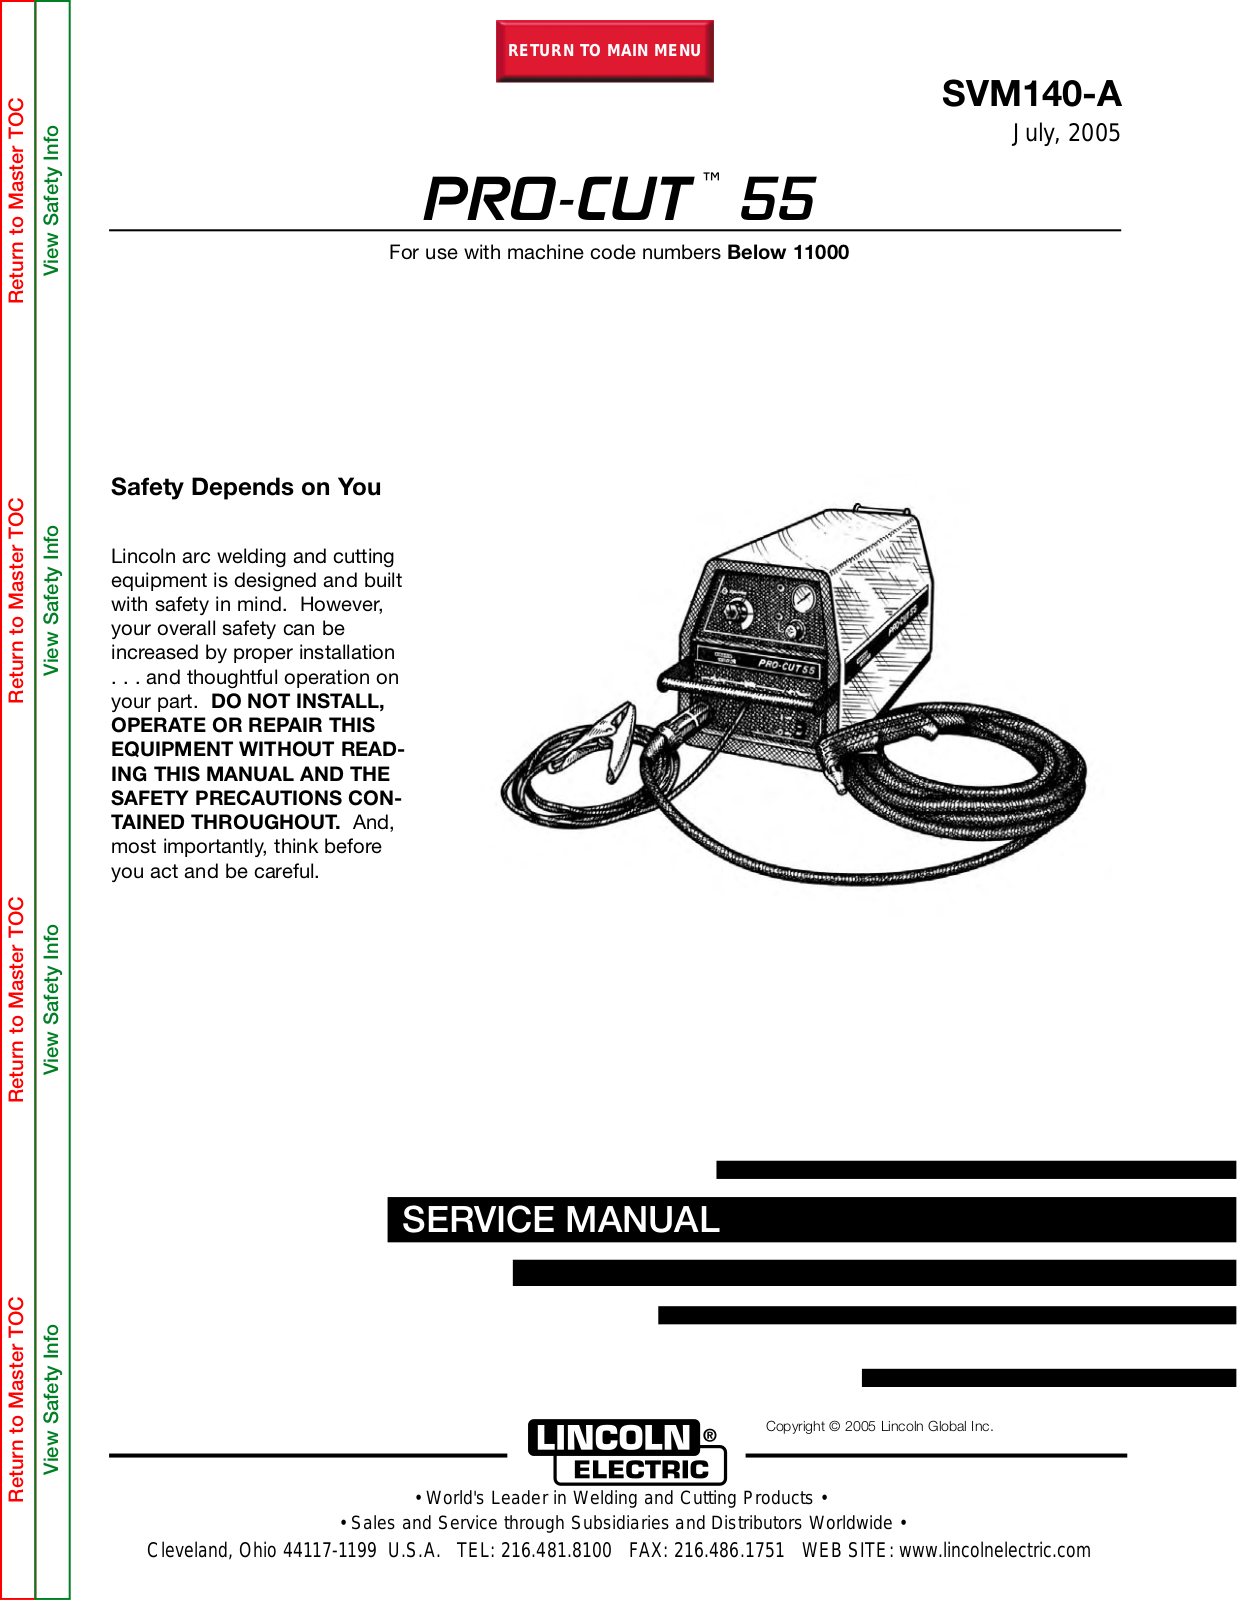 Lincoln Electric PRO-CUT 55 User Manual